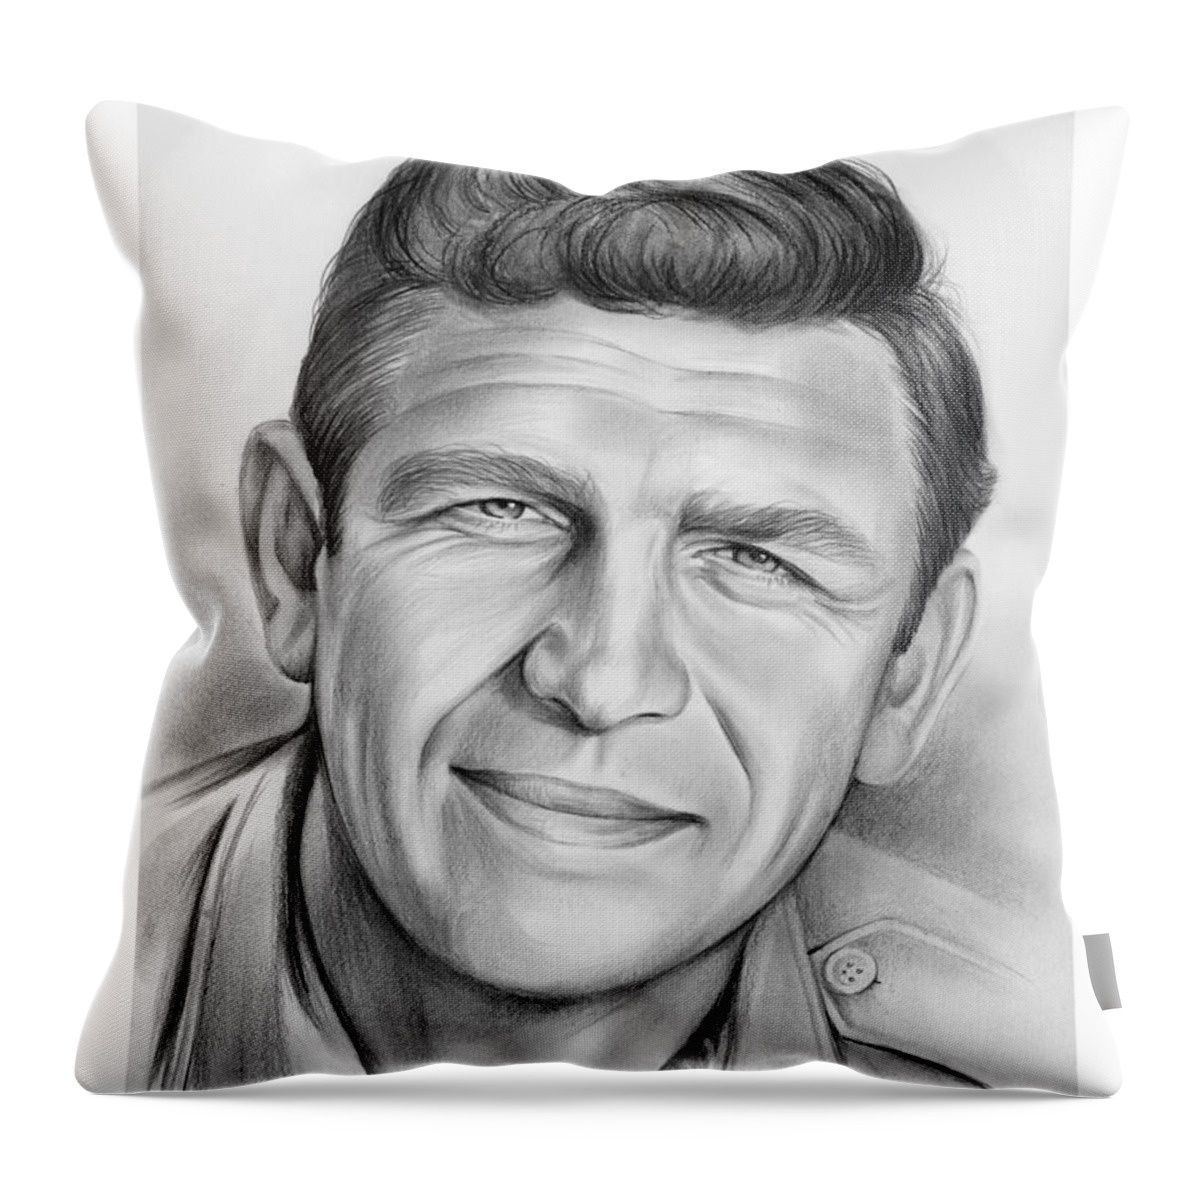 Andy Griffith Throw Pillow featuring the drawing Andy Griffith by Greg Joens